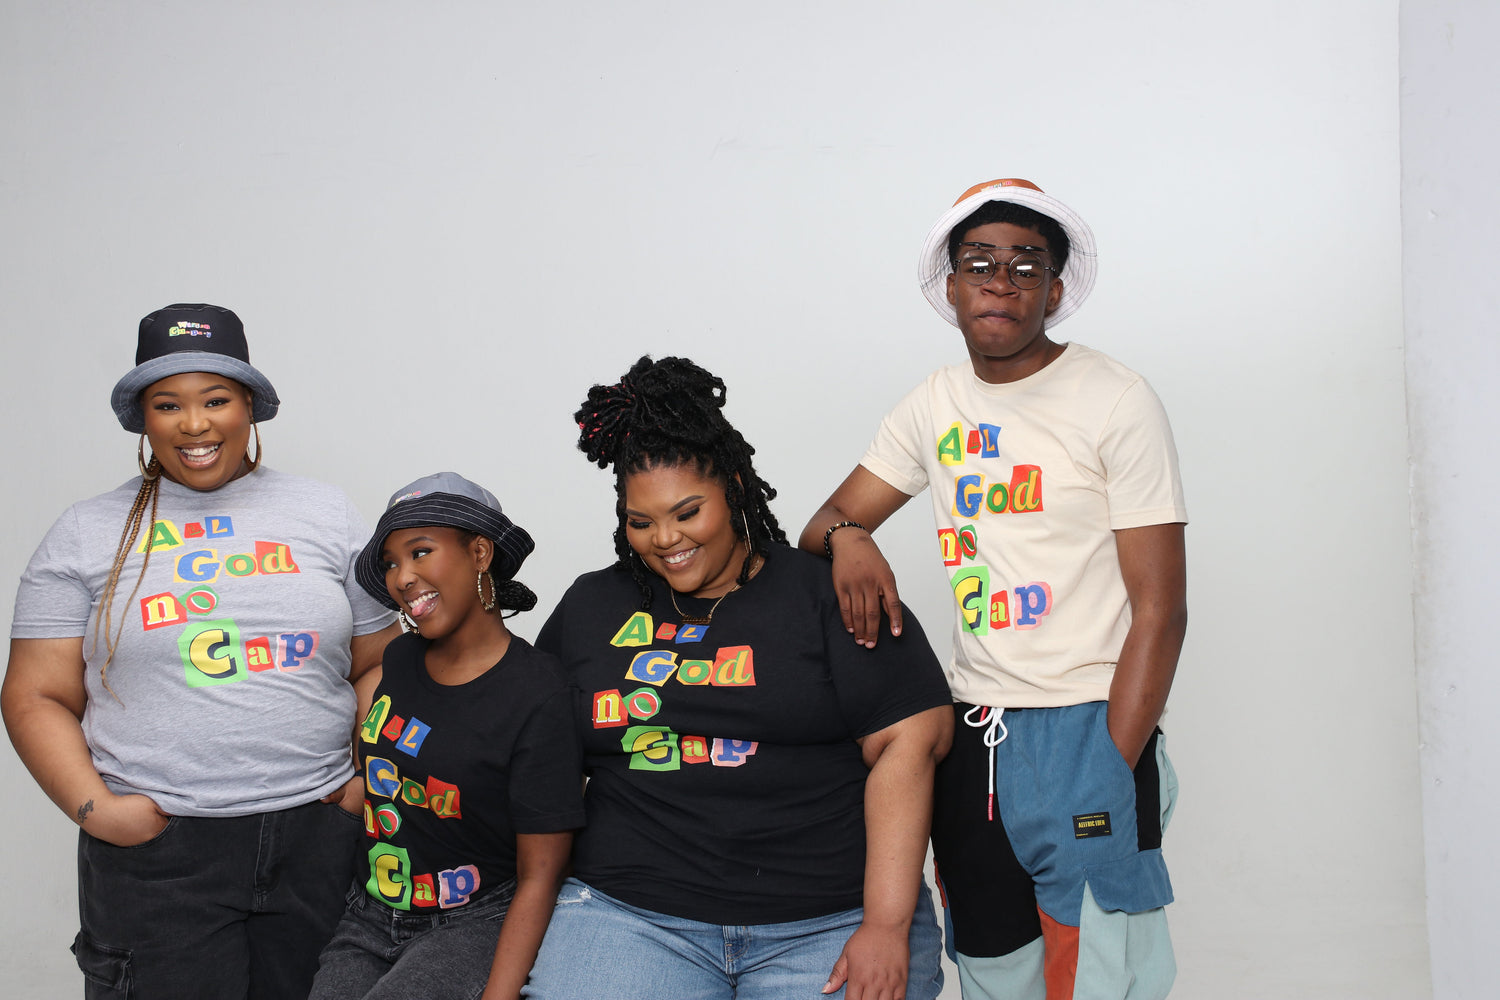 The photo features a group of people wearing T-shirts with matching designs. They are standing close together, smiling, and looking happy. The T-shirts are the same style and color, with a bold design on the front that is visible in the image. The group appears to be diverse, with a mix of different genders, ages, and ethnicities. They seem to be enjoying each other's company and showcasing the T-shirts as a cohesive and stylish team.